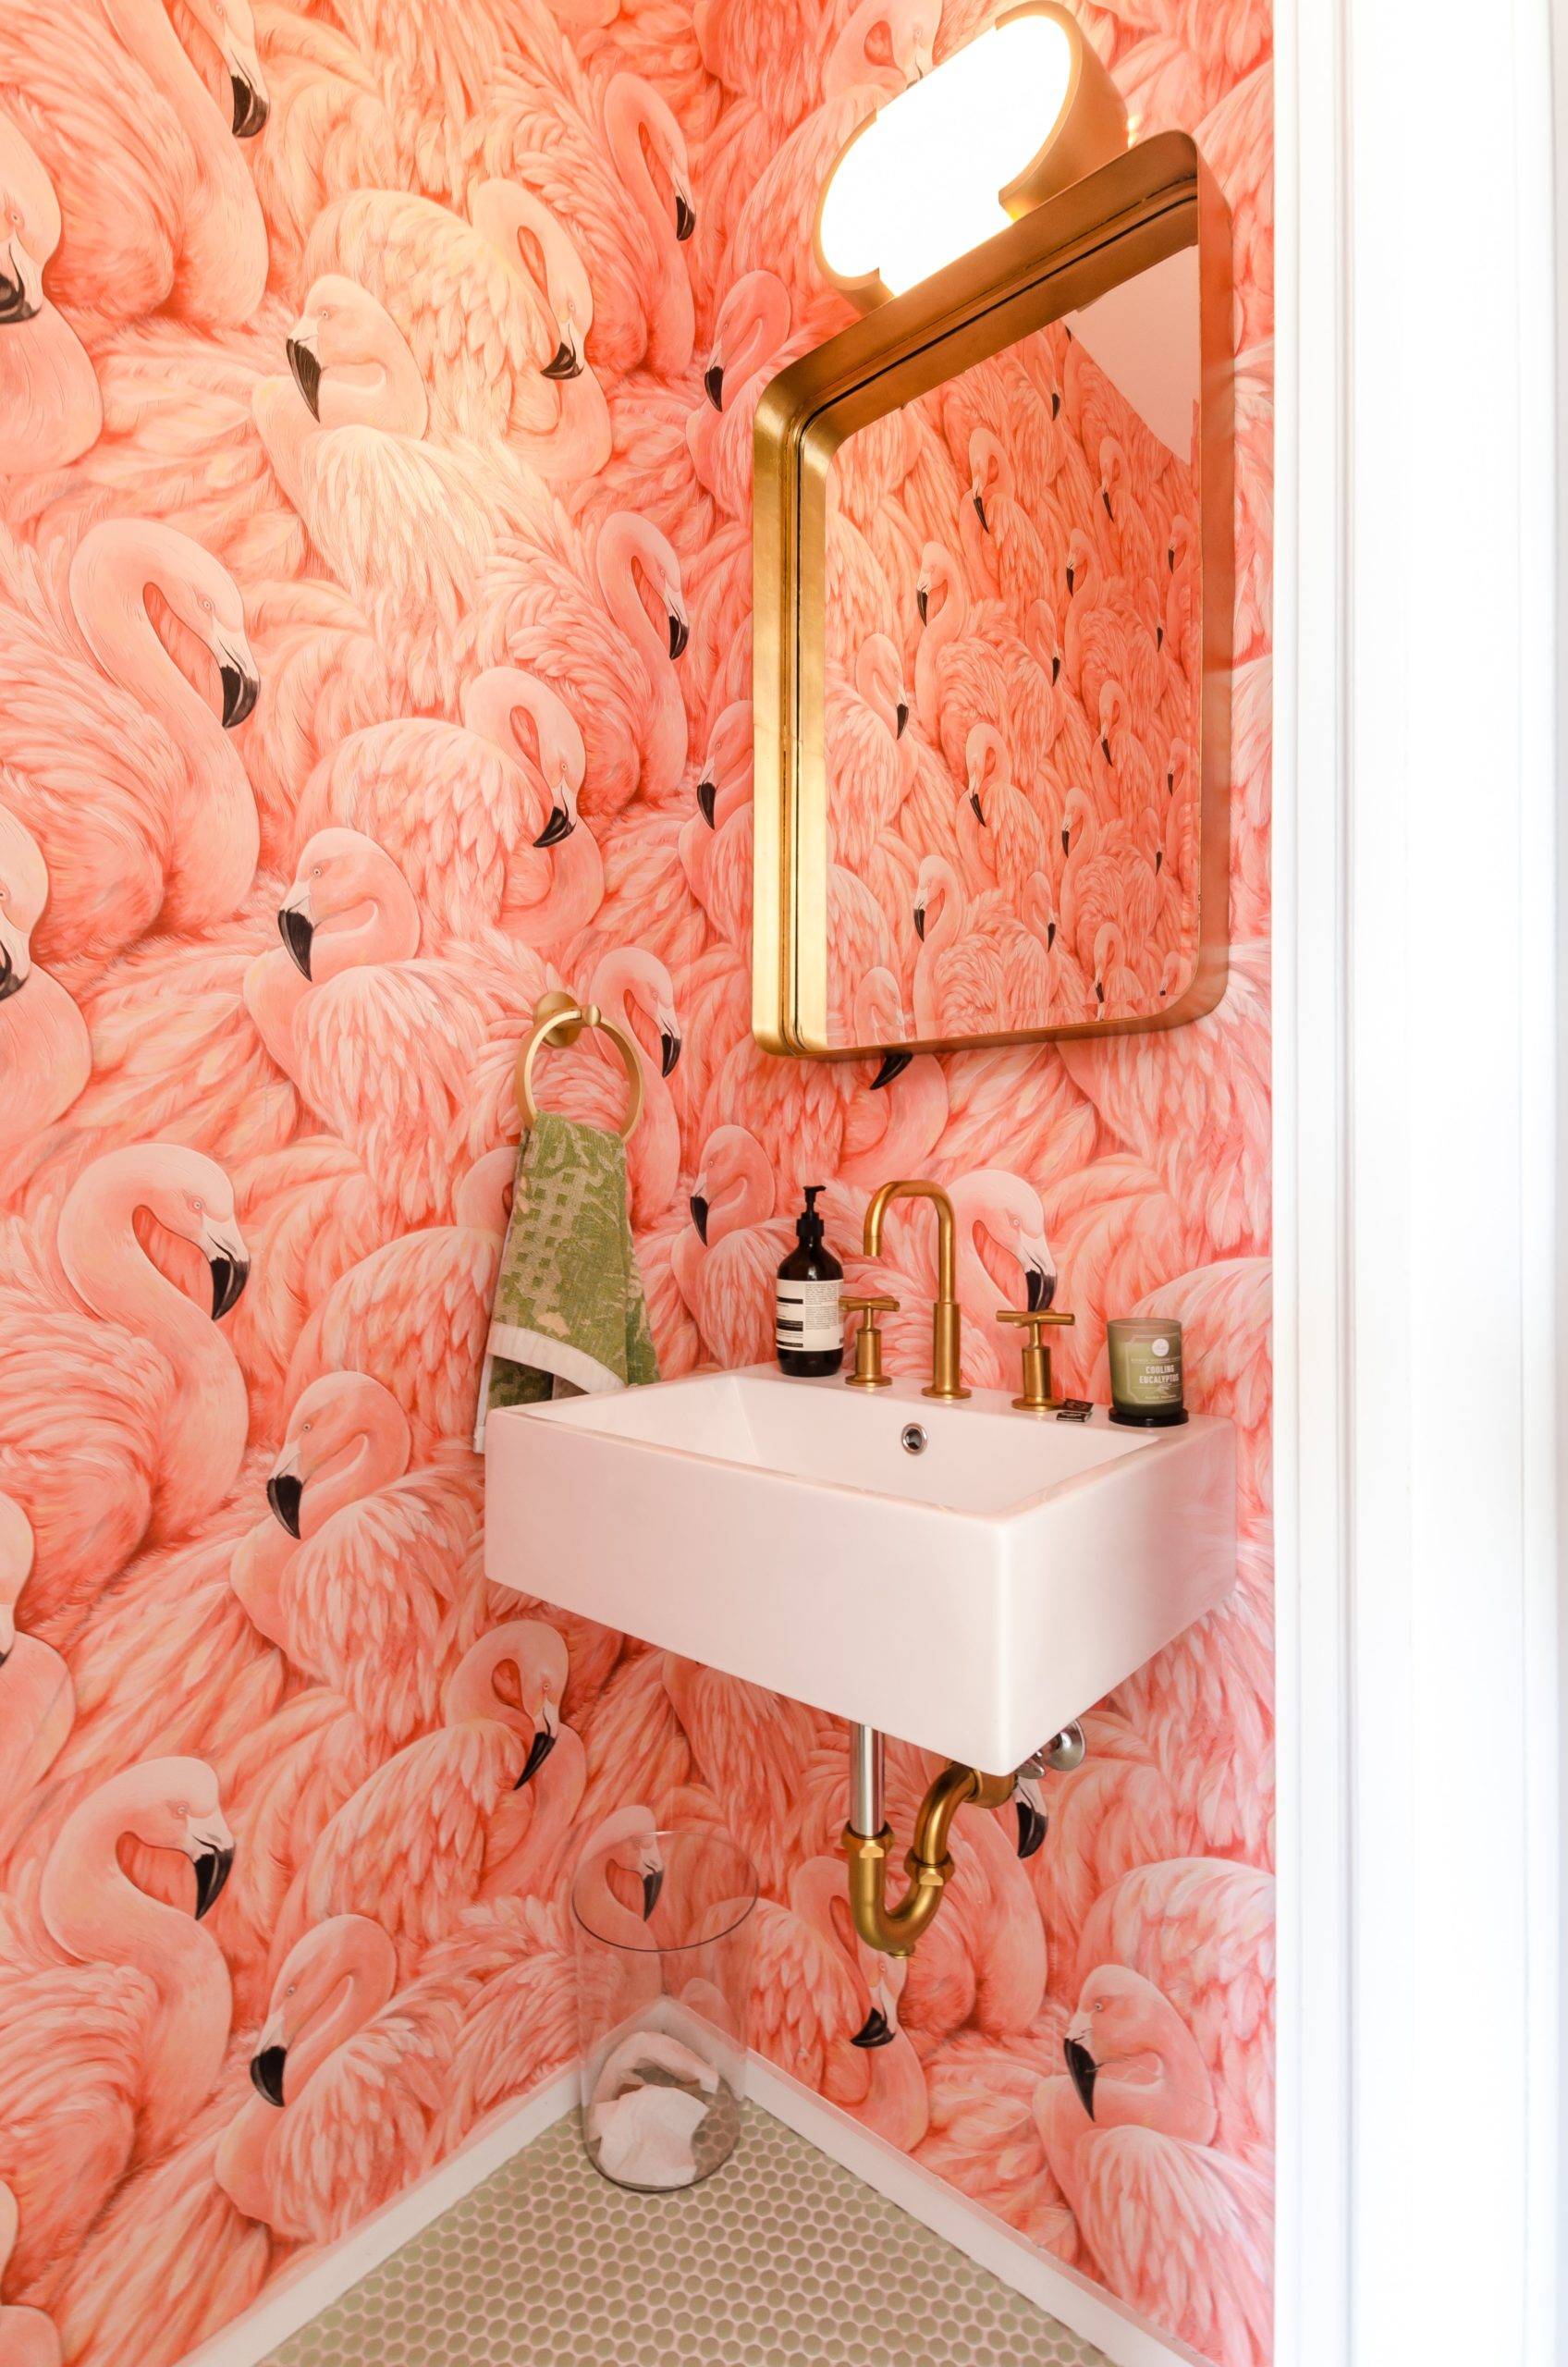 Flamingo-Wallpaper-in-Small-Powder-Room-Photo-by-Chastity-Cortijo-64953-scaled